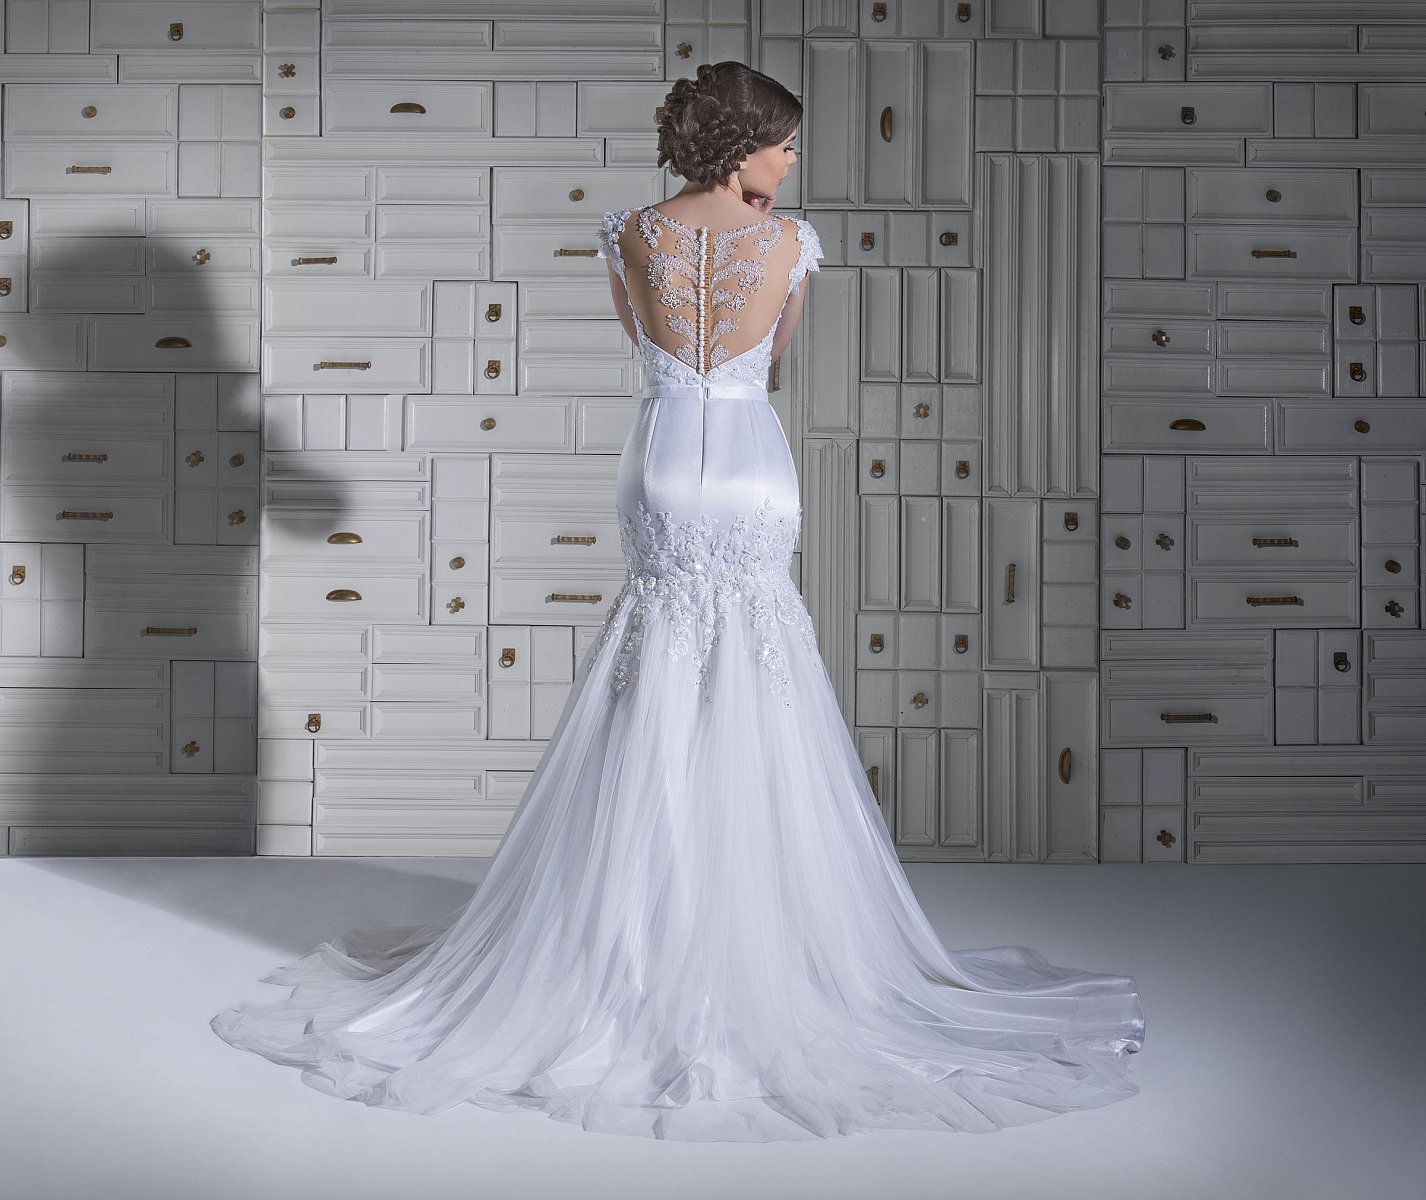 Chrystelle Atallah Collezione 2014 - Sposa - 1